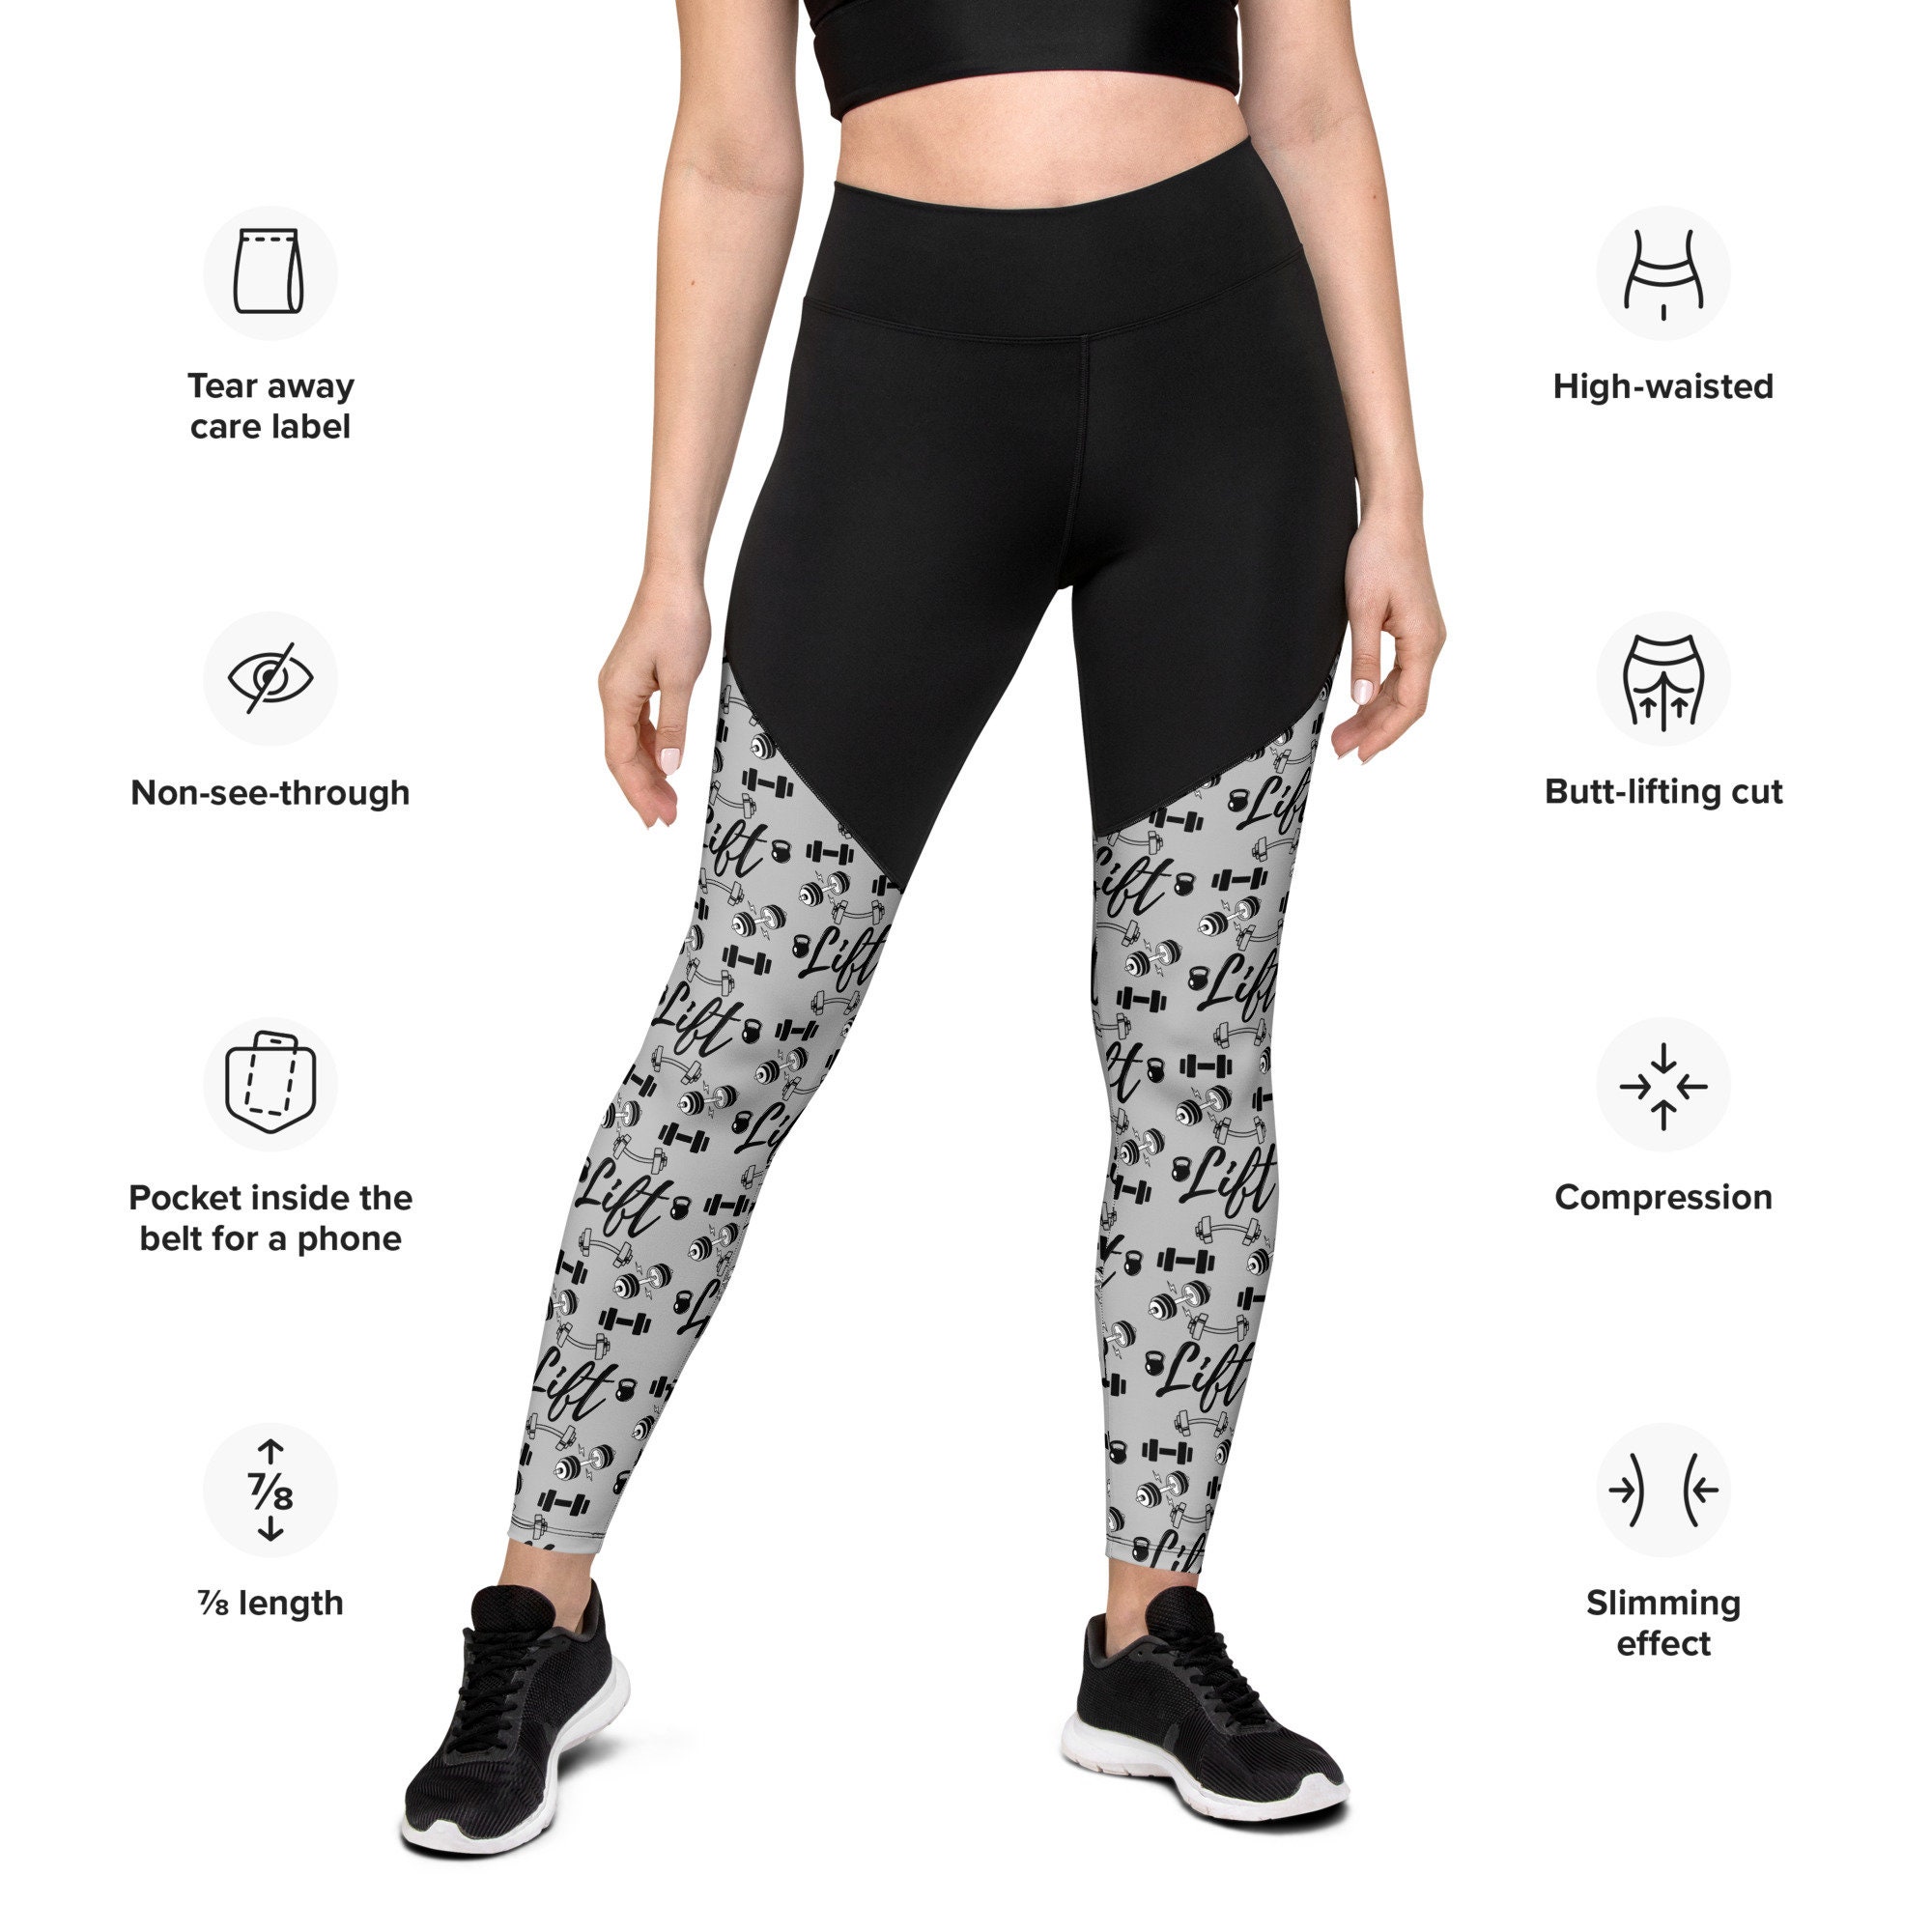 Women's Compression Clothing